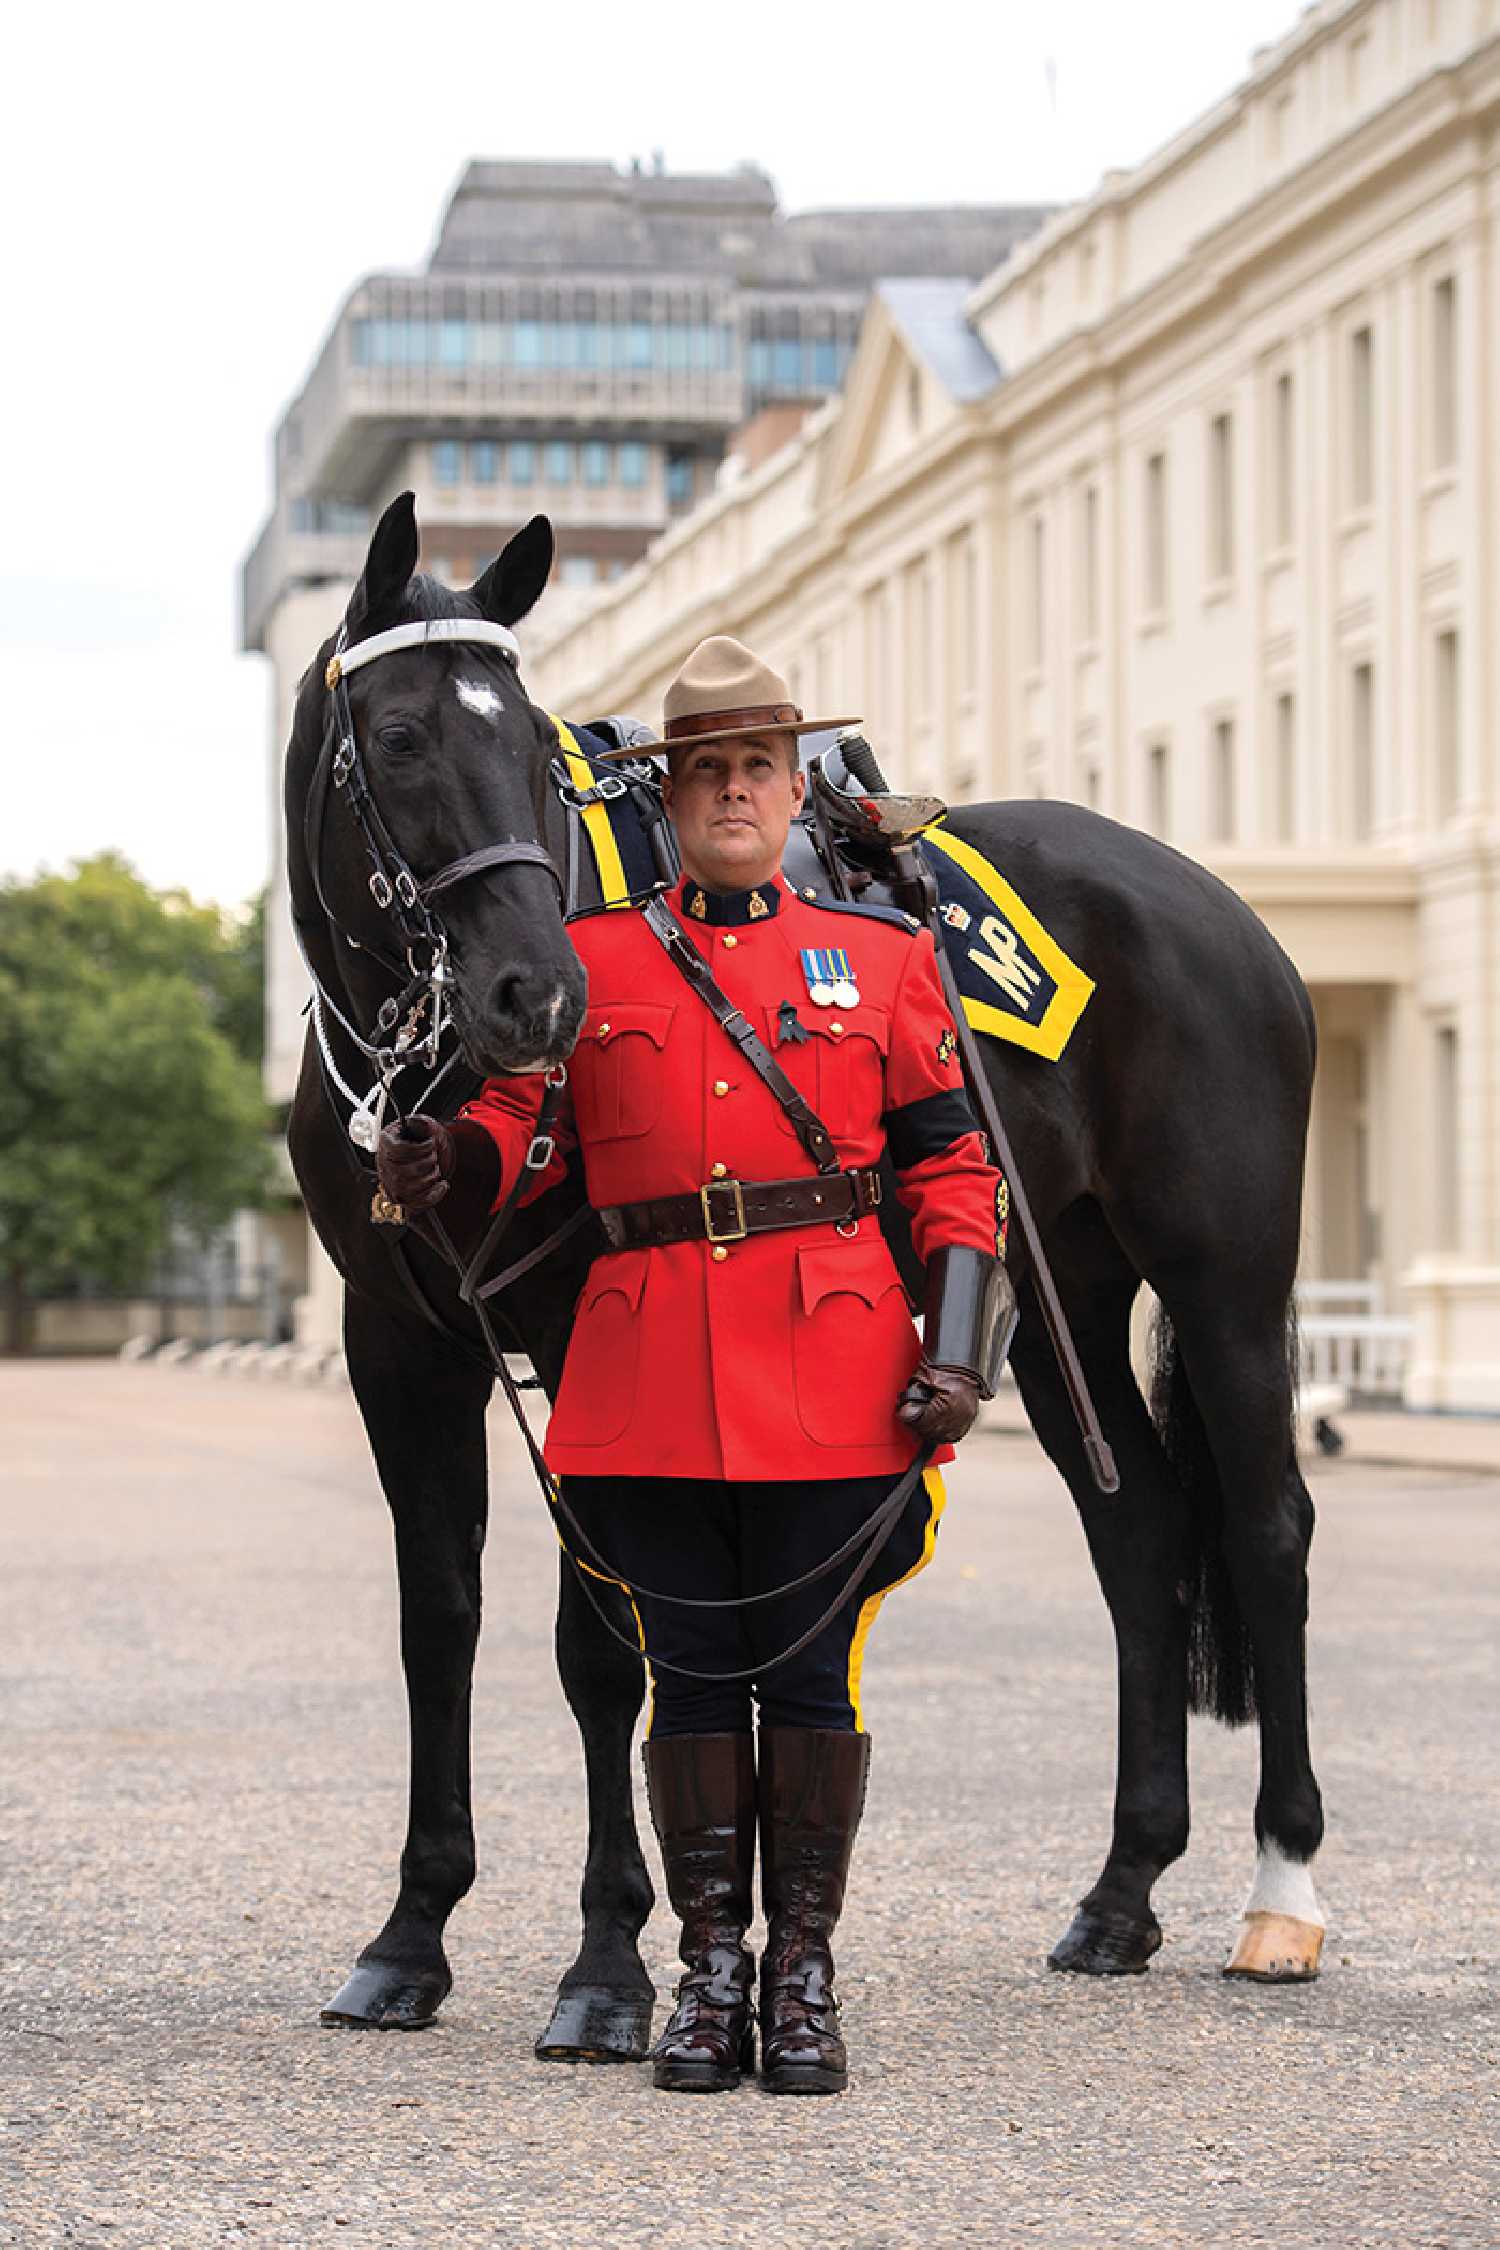 Honoring the Queen: On Monday, when the late Queen Elizabeth was laid to rest, four RCMP officers on horseback led the Queen’s funeral procession. One of the four is Scott Williamson from Rocanville. 